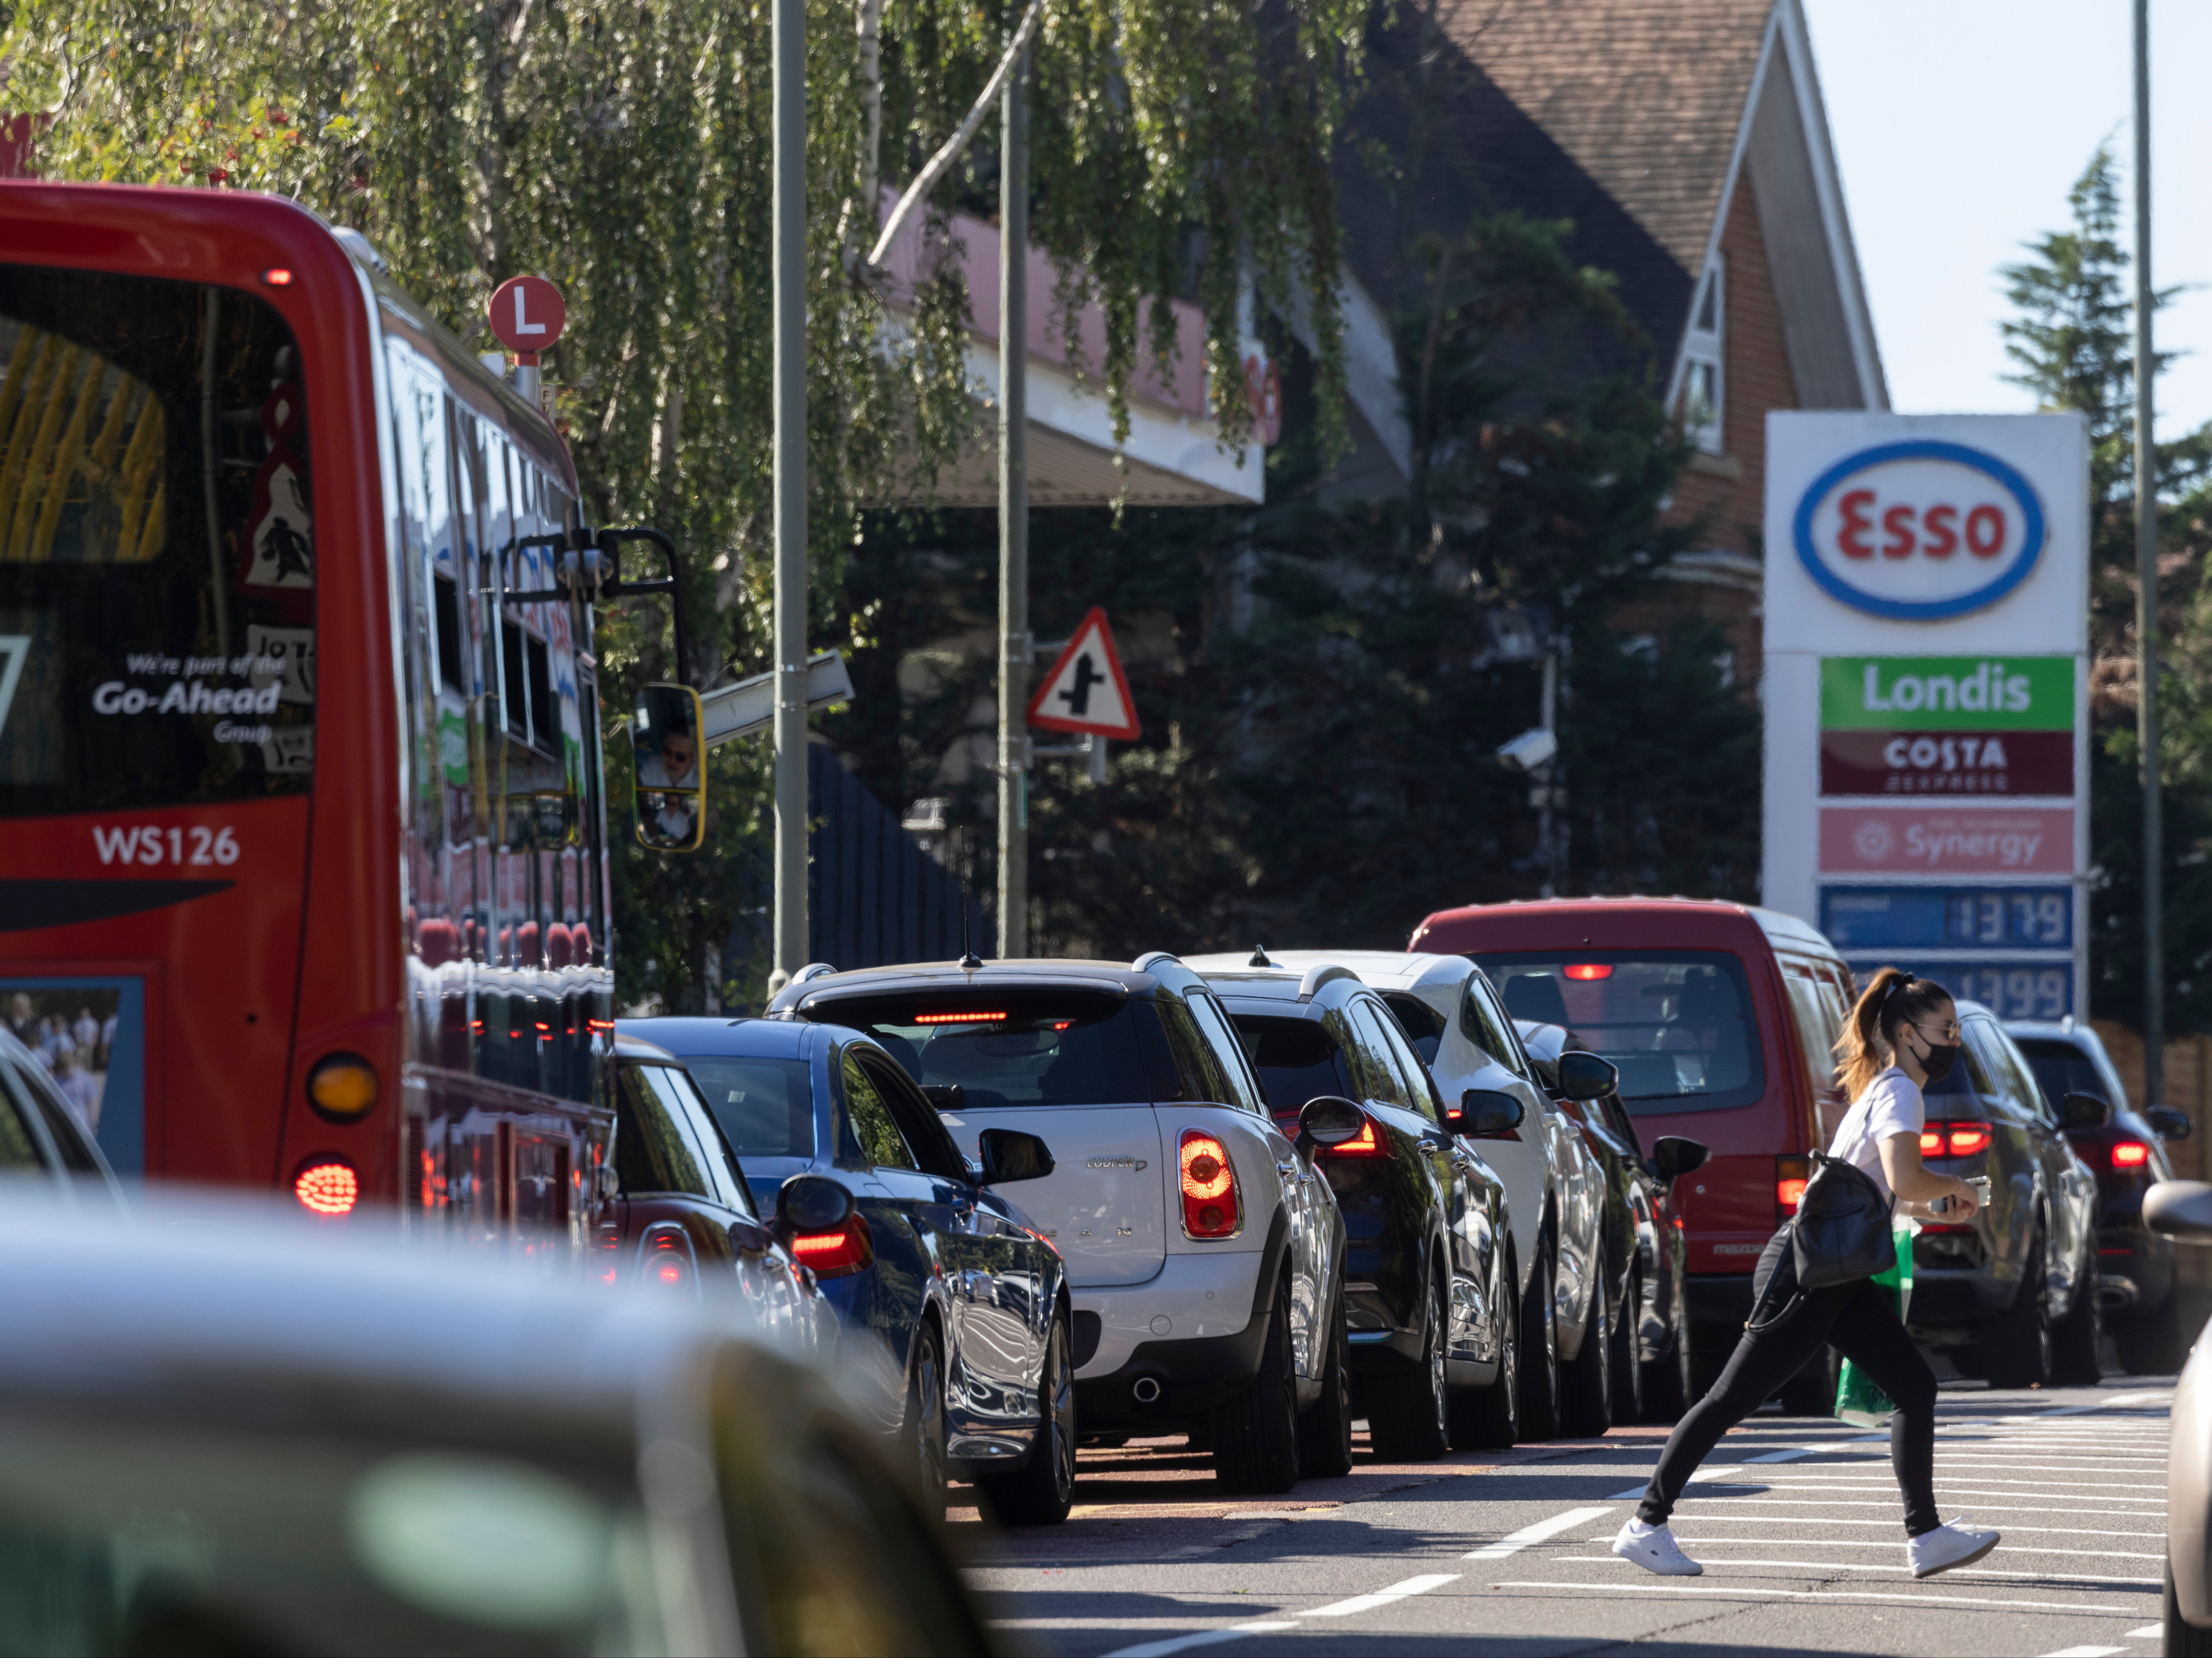 A queue forms for an Esso petrol station in London